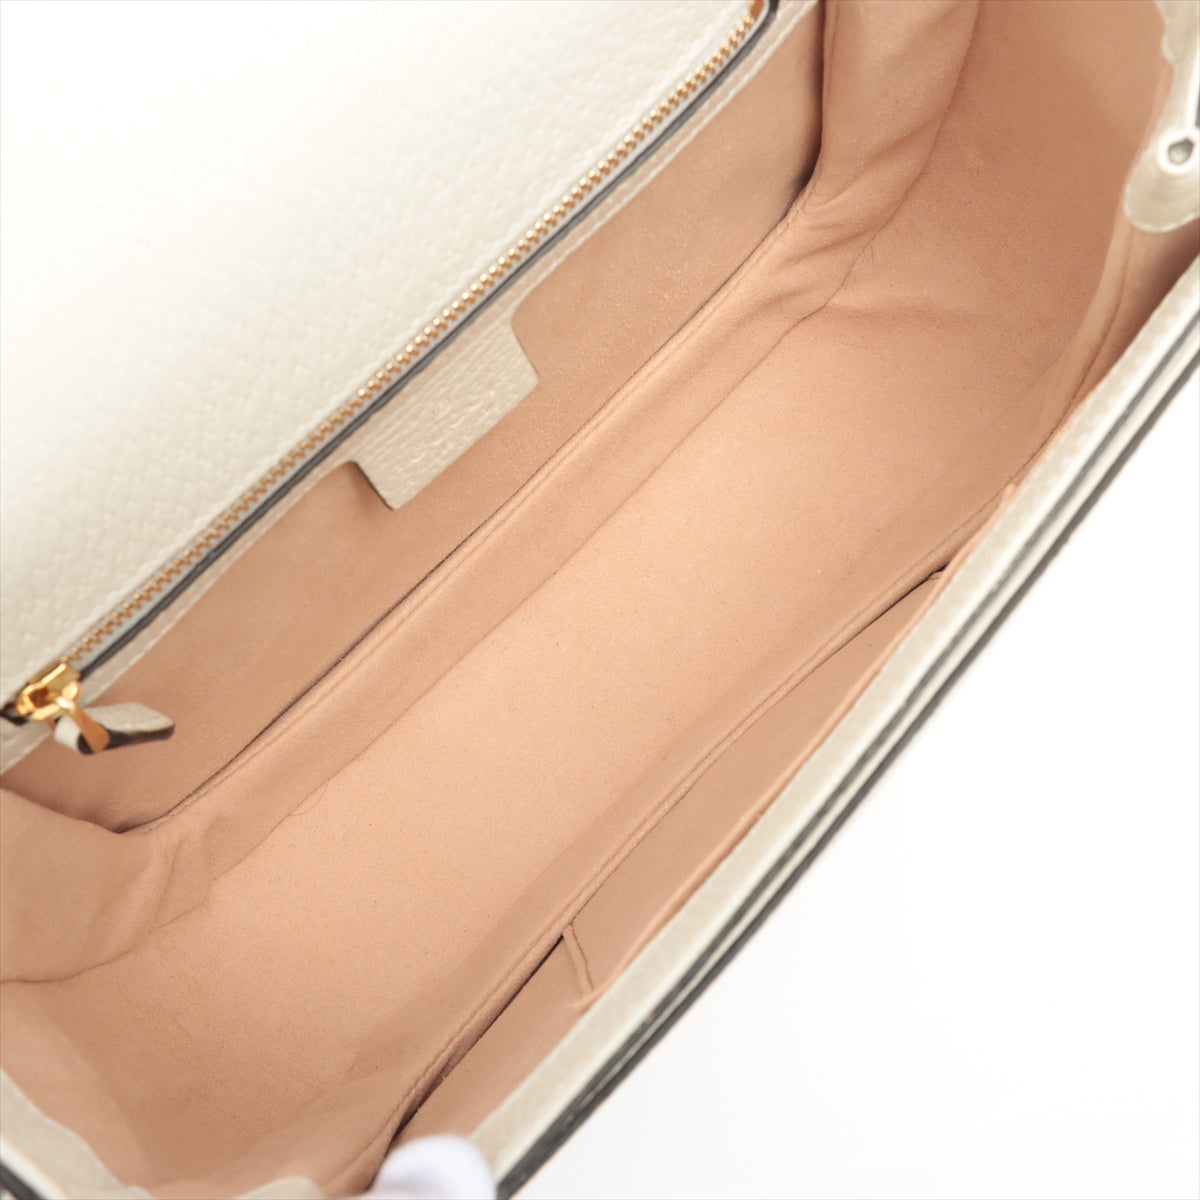 Gucci Ophidia Leather Shoulder bag White 601044